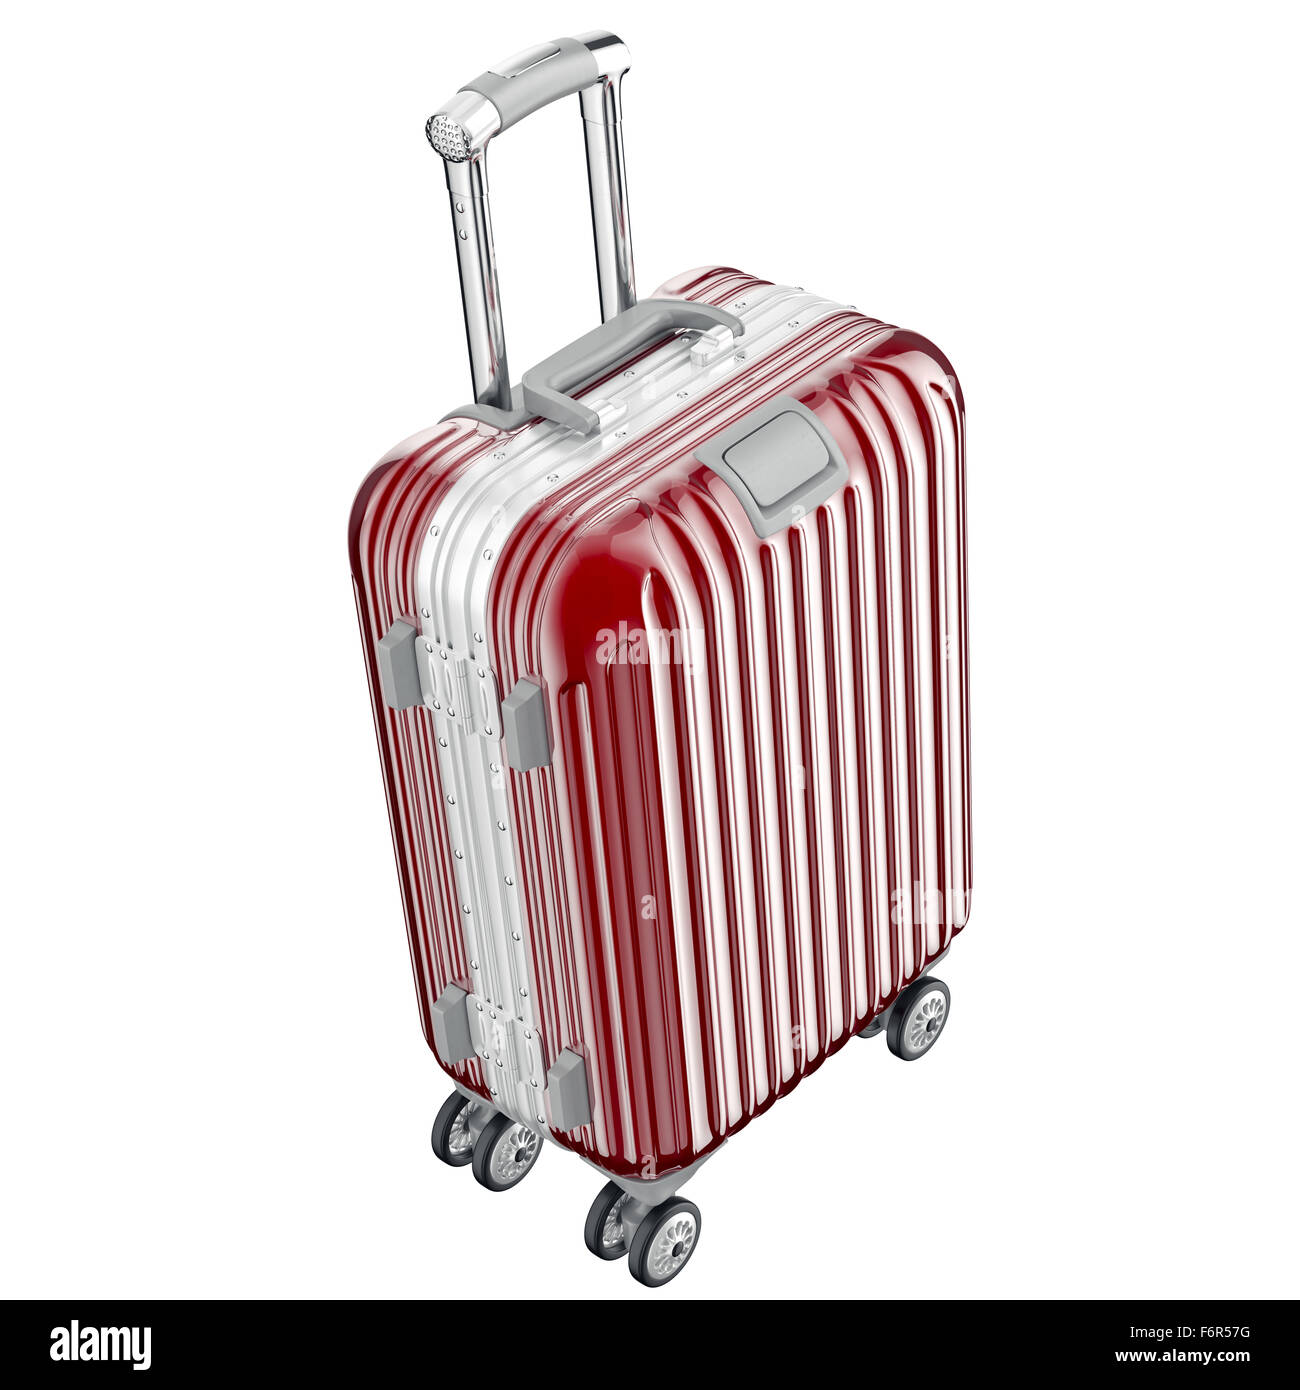 Red luggage on wheels Stock Photo - Alamy